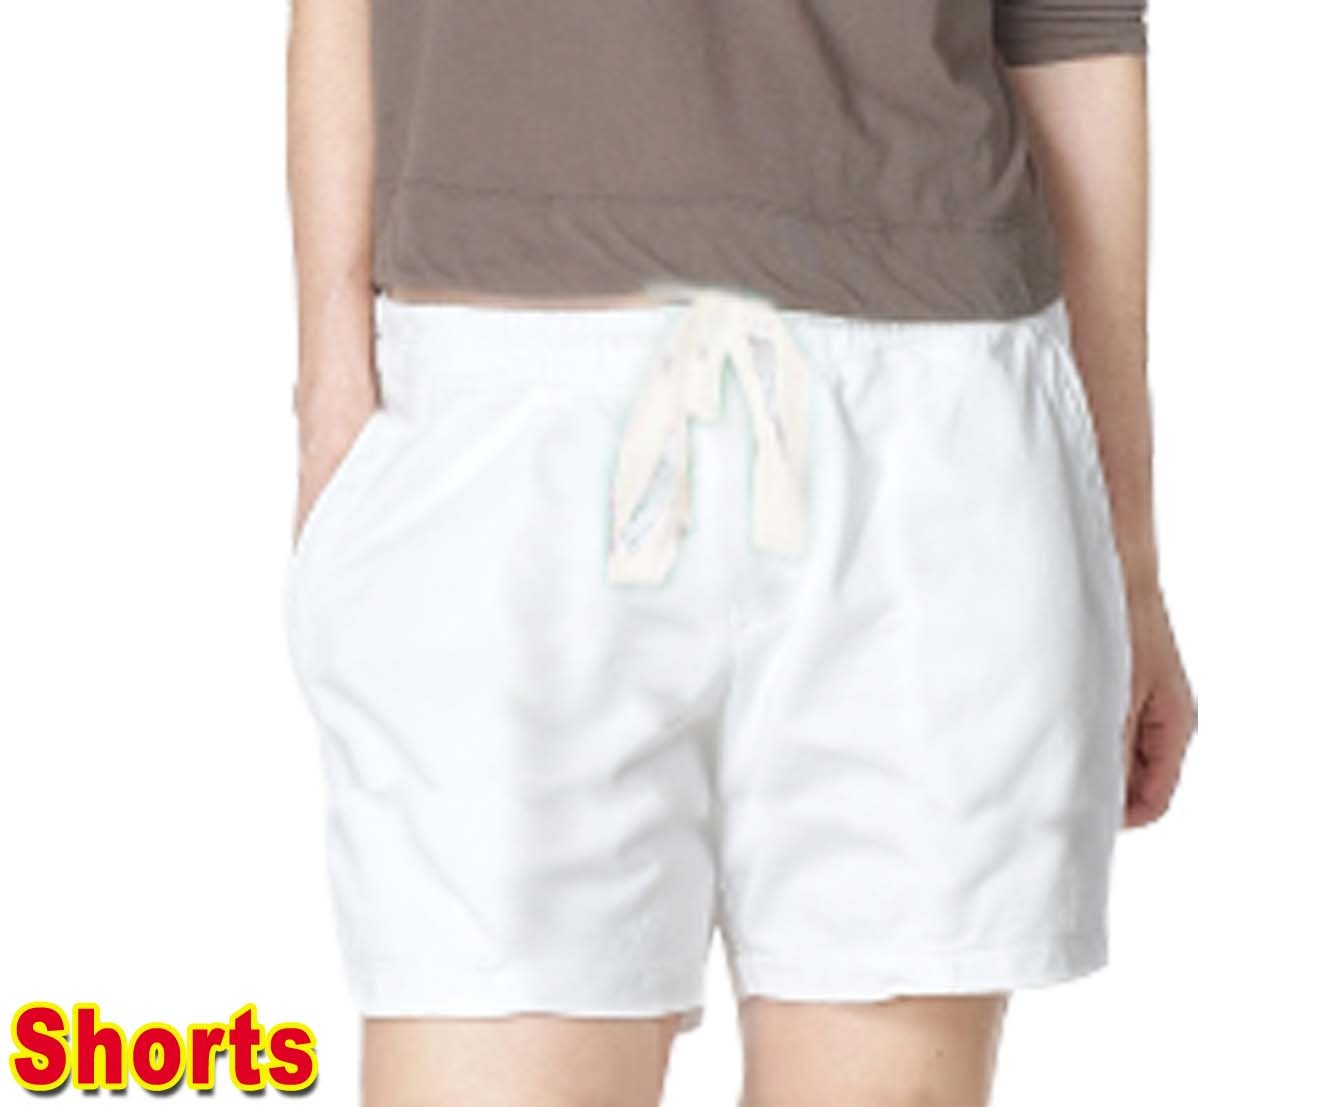 Poplin fabric short with 2 side pocket 1 back pocket elasticated twill drawstring (white) (inseam is 5 inches)